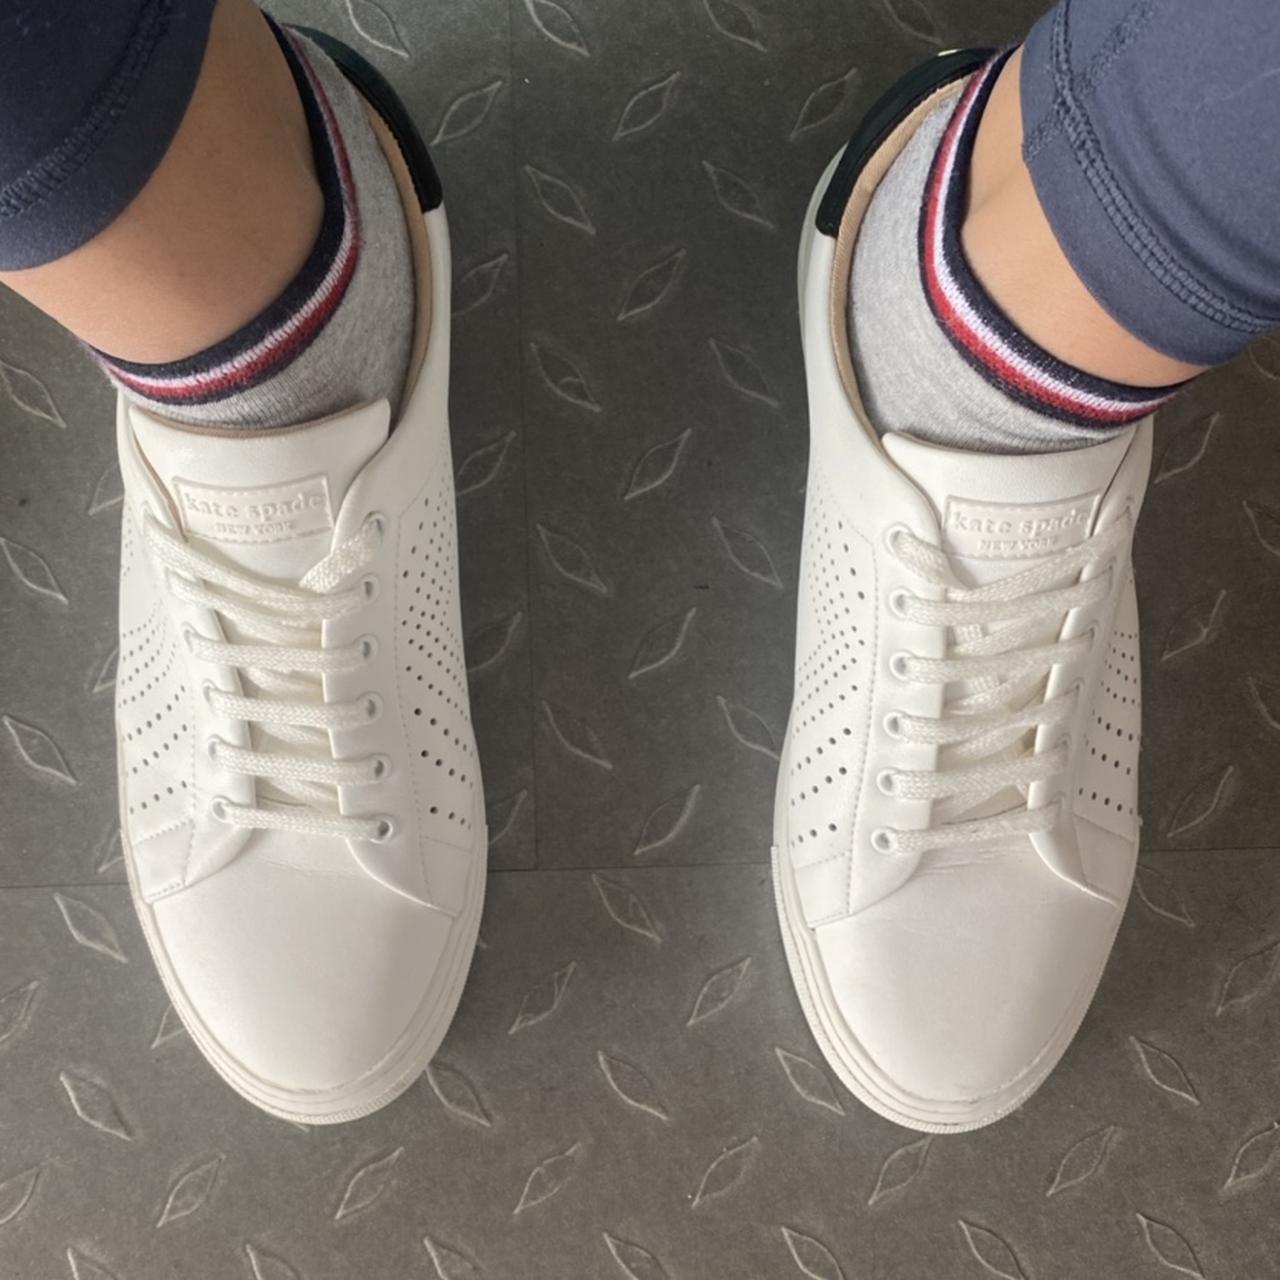 Kate Spade New York Women's Black and White Trainers | Depop